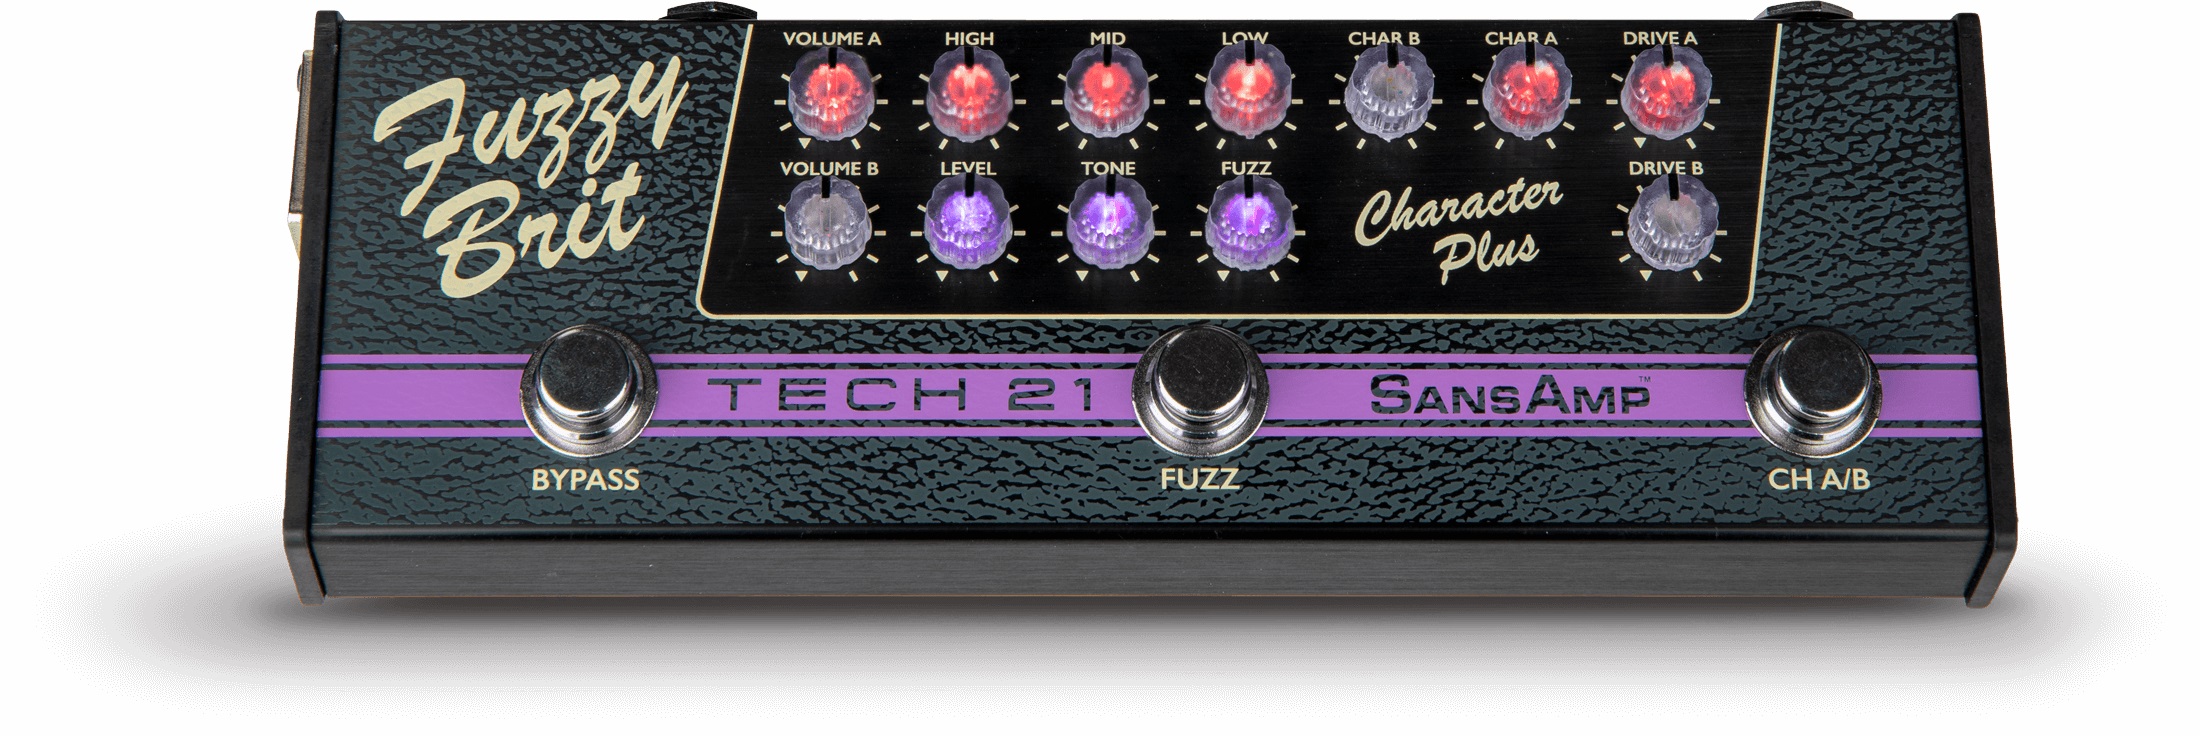 Tech 21 Fuzzy Brit Character Series - Guitar amp modeling simulation - Variation 1